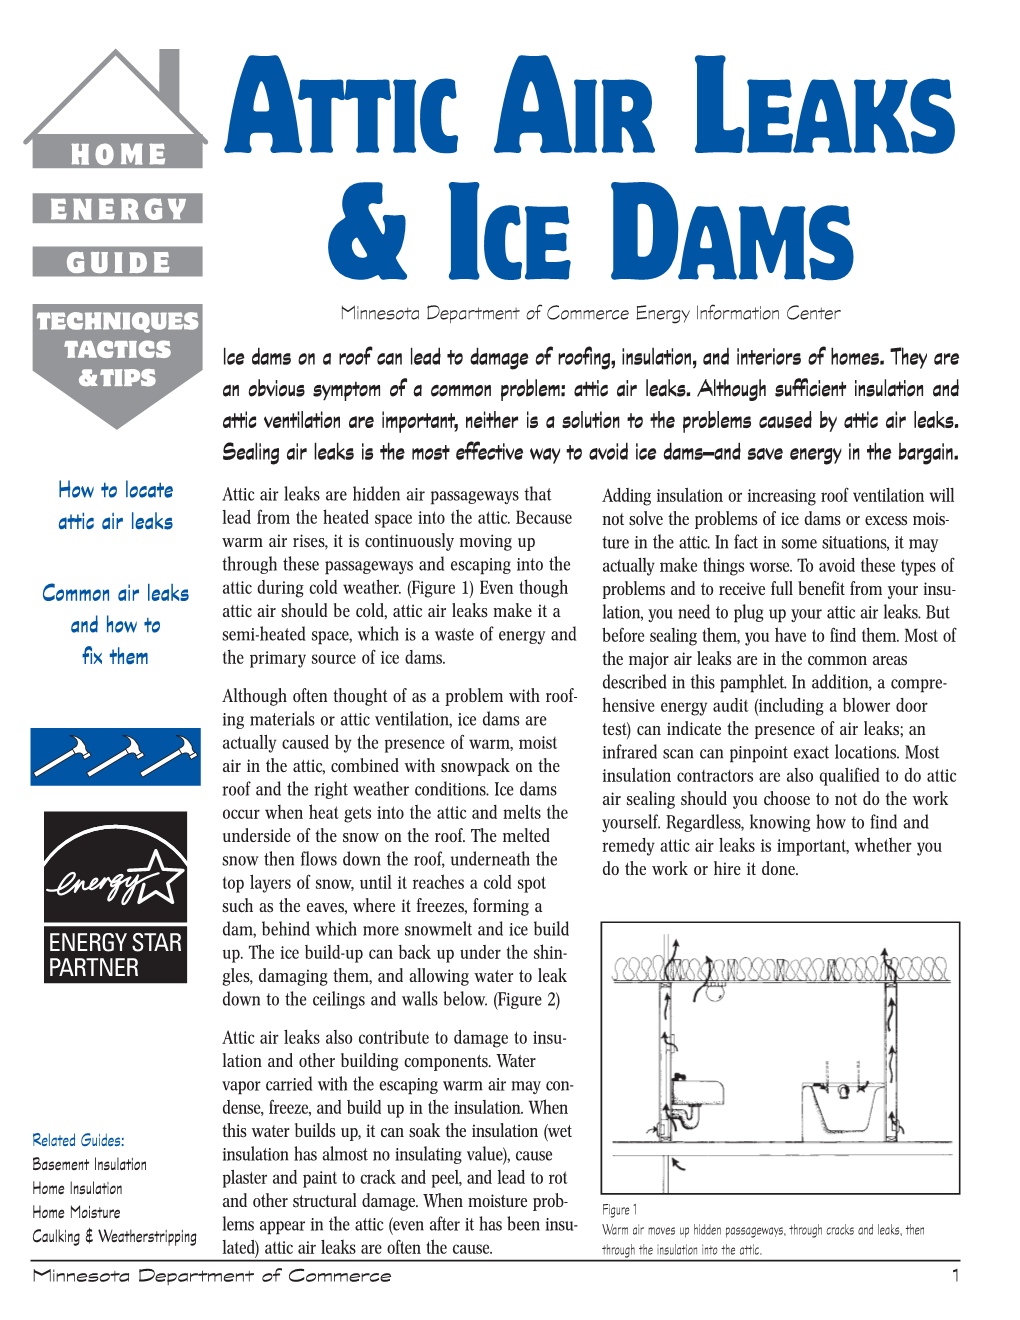 Air Leaks and Ice Dams